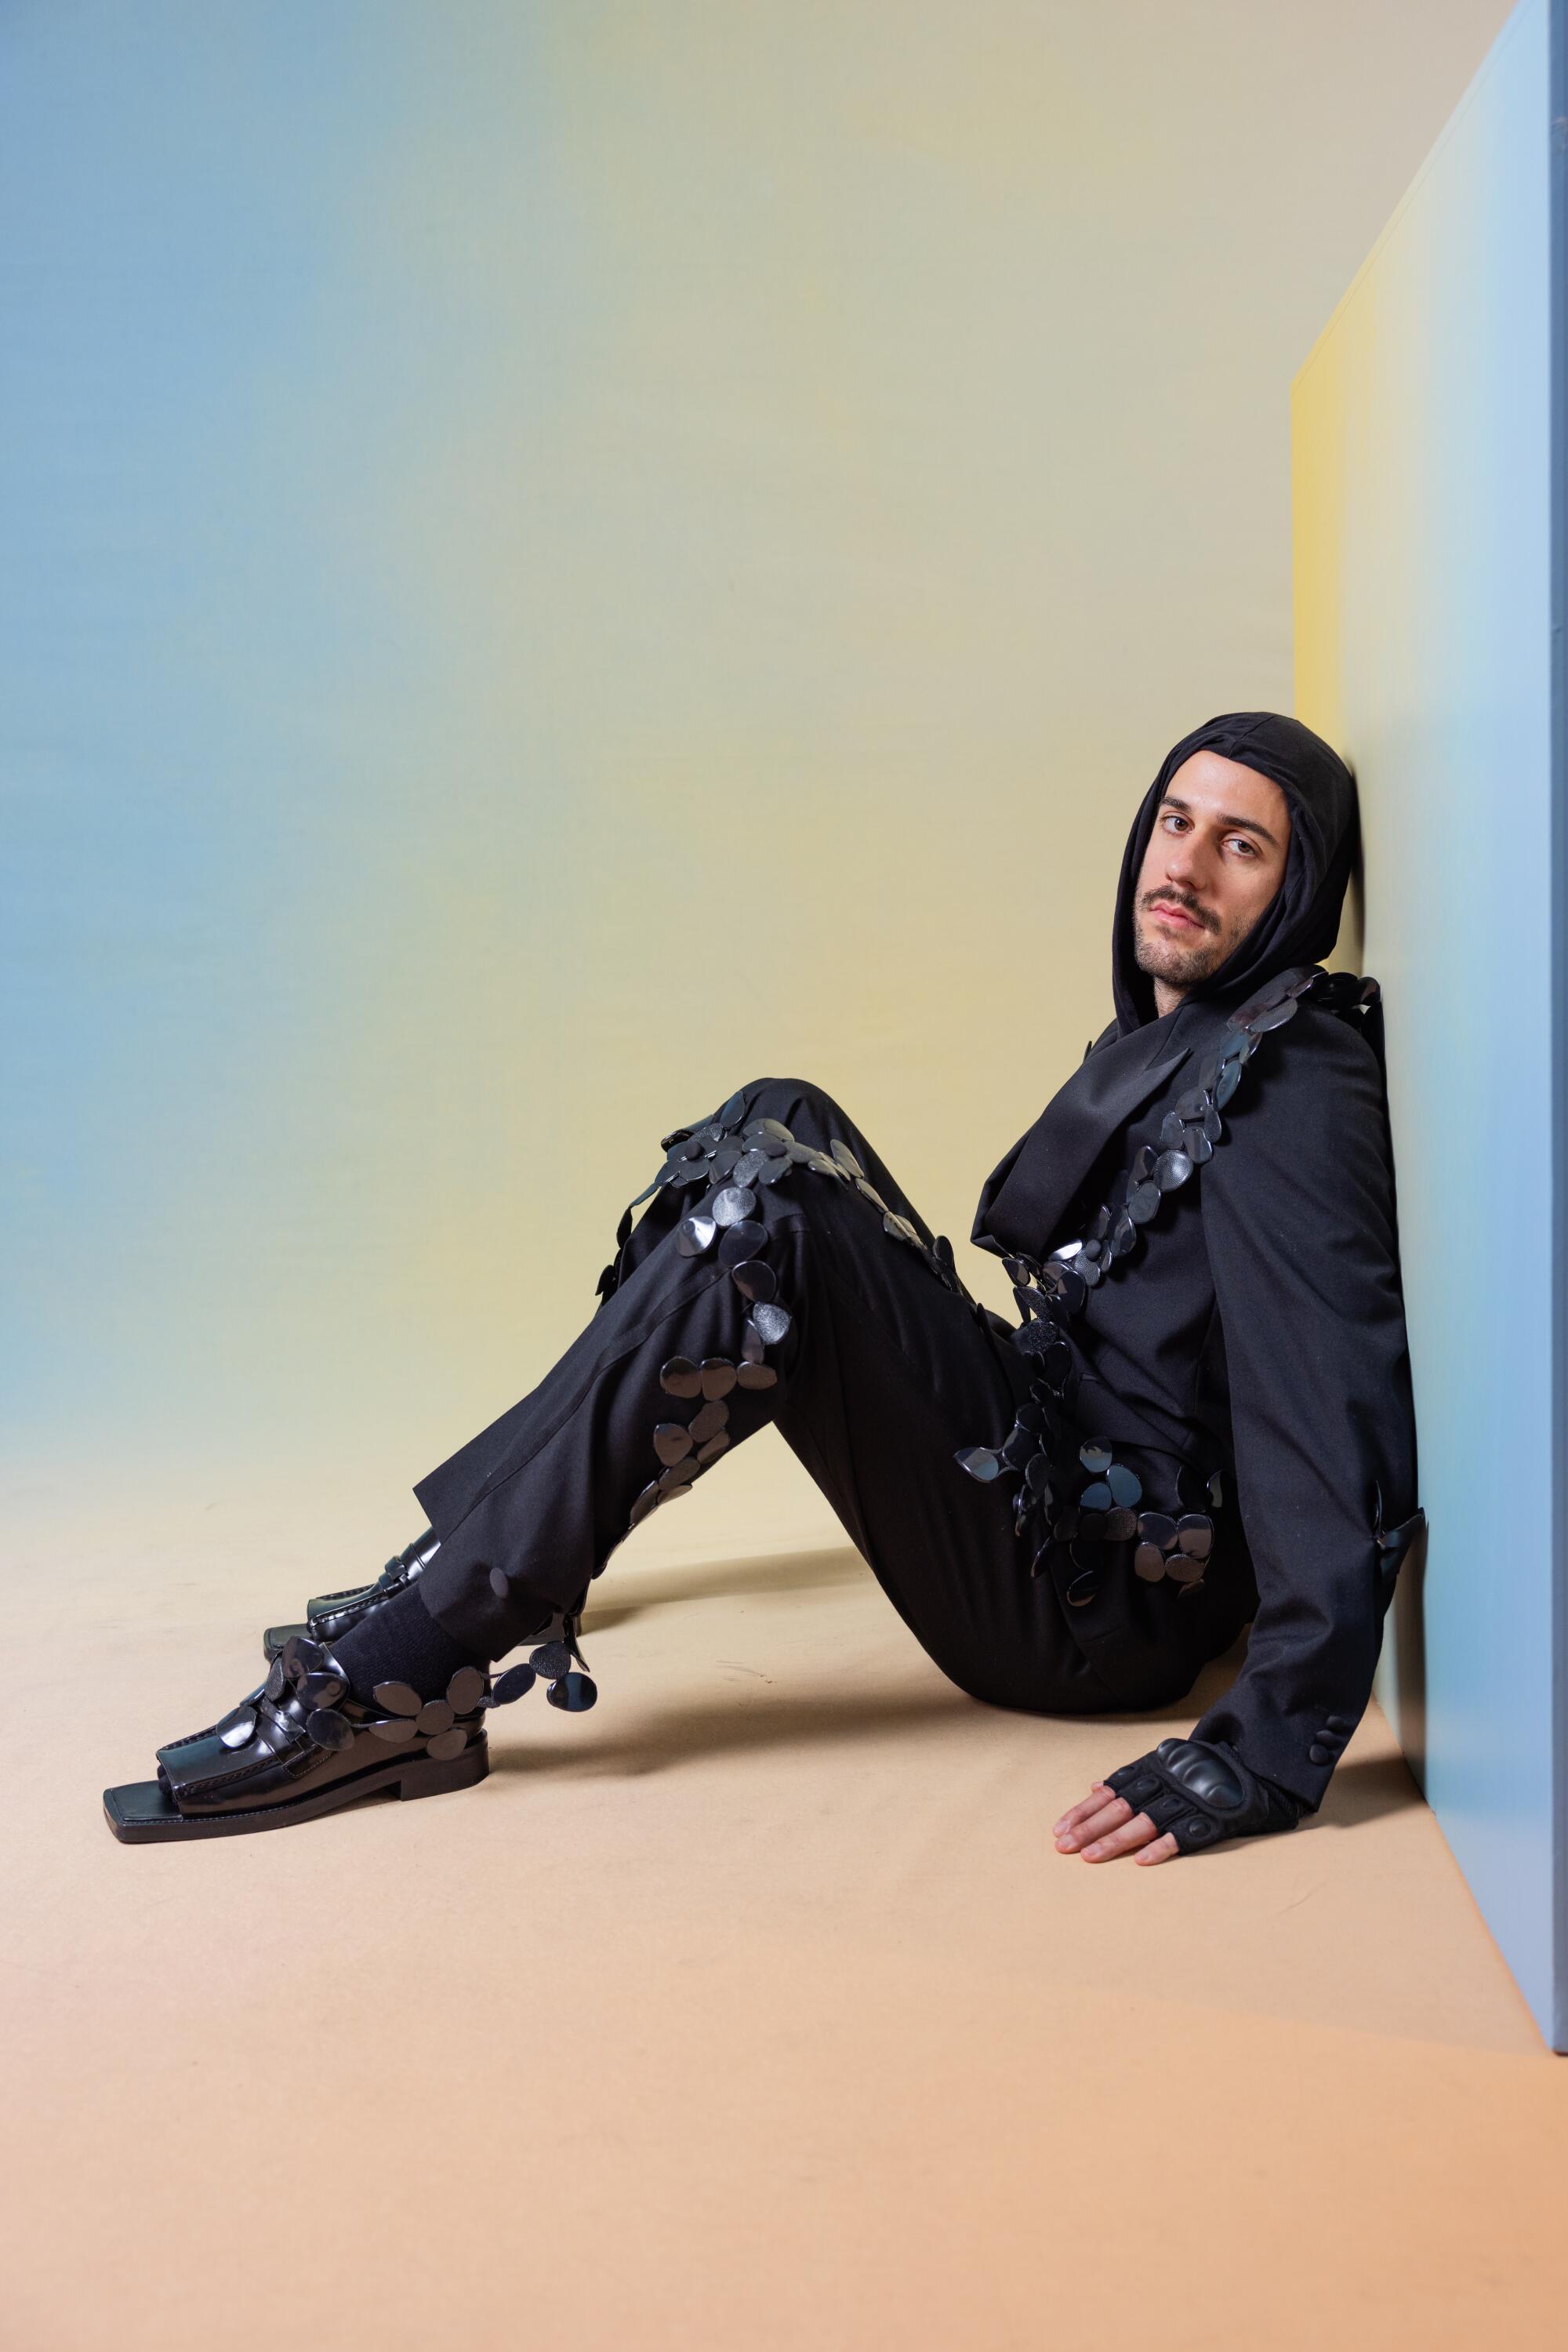 Aury Alby wears a dark outfit and hood while sitting on the floor and leaning against a wall.